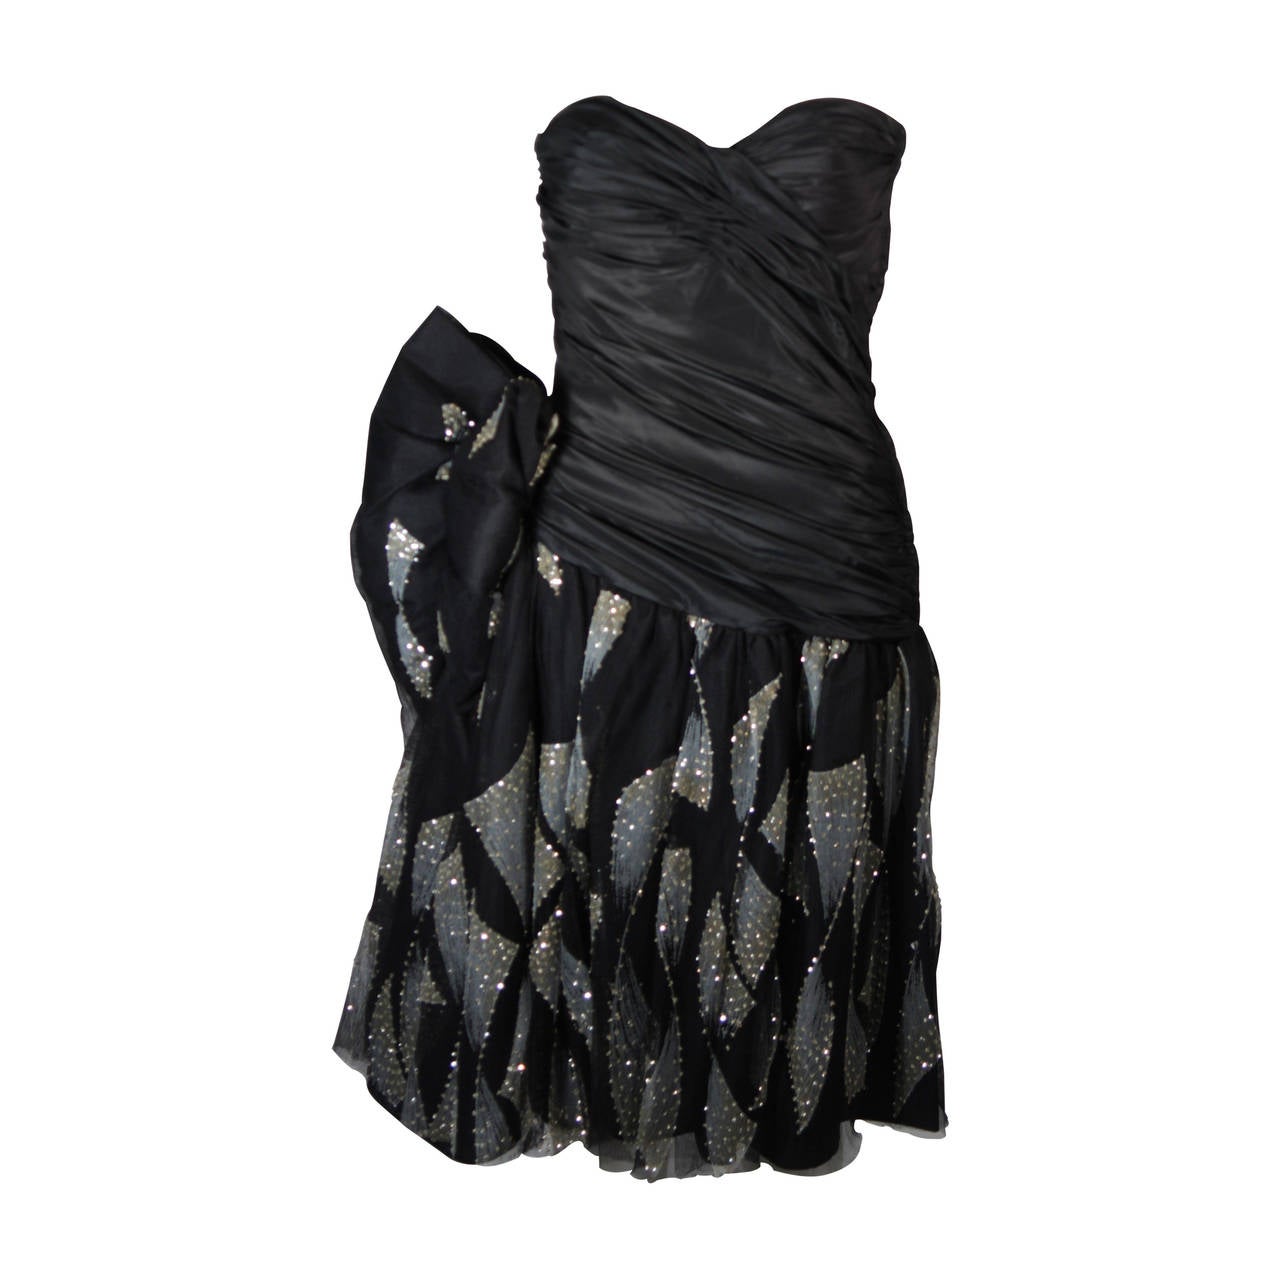 Vicky Tiel Black Cocktail Dress with Metallic Accents Size Small at 1stdibs